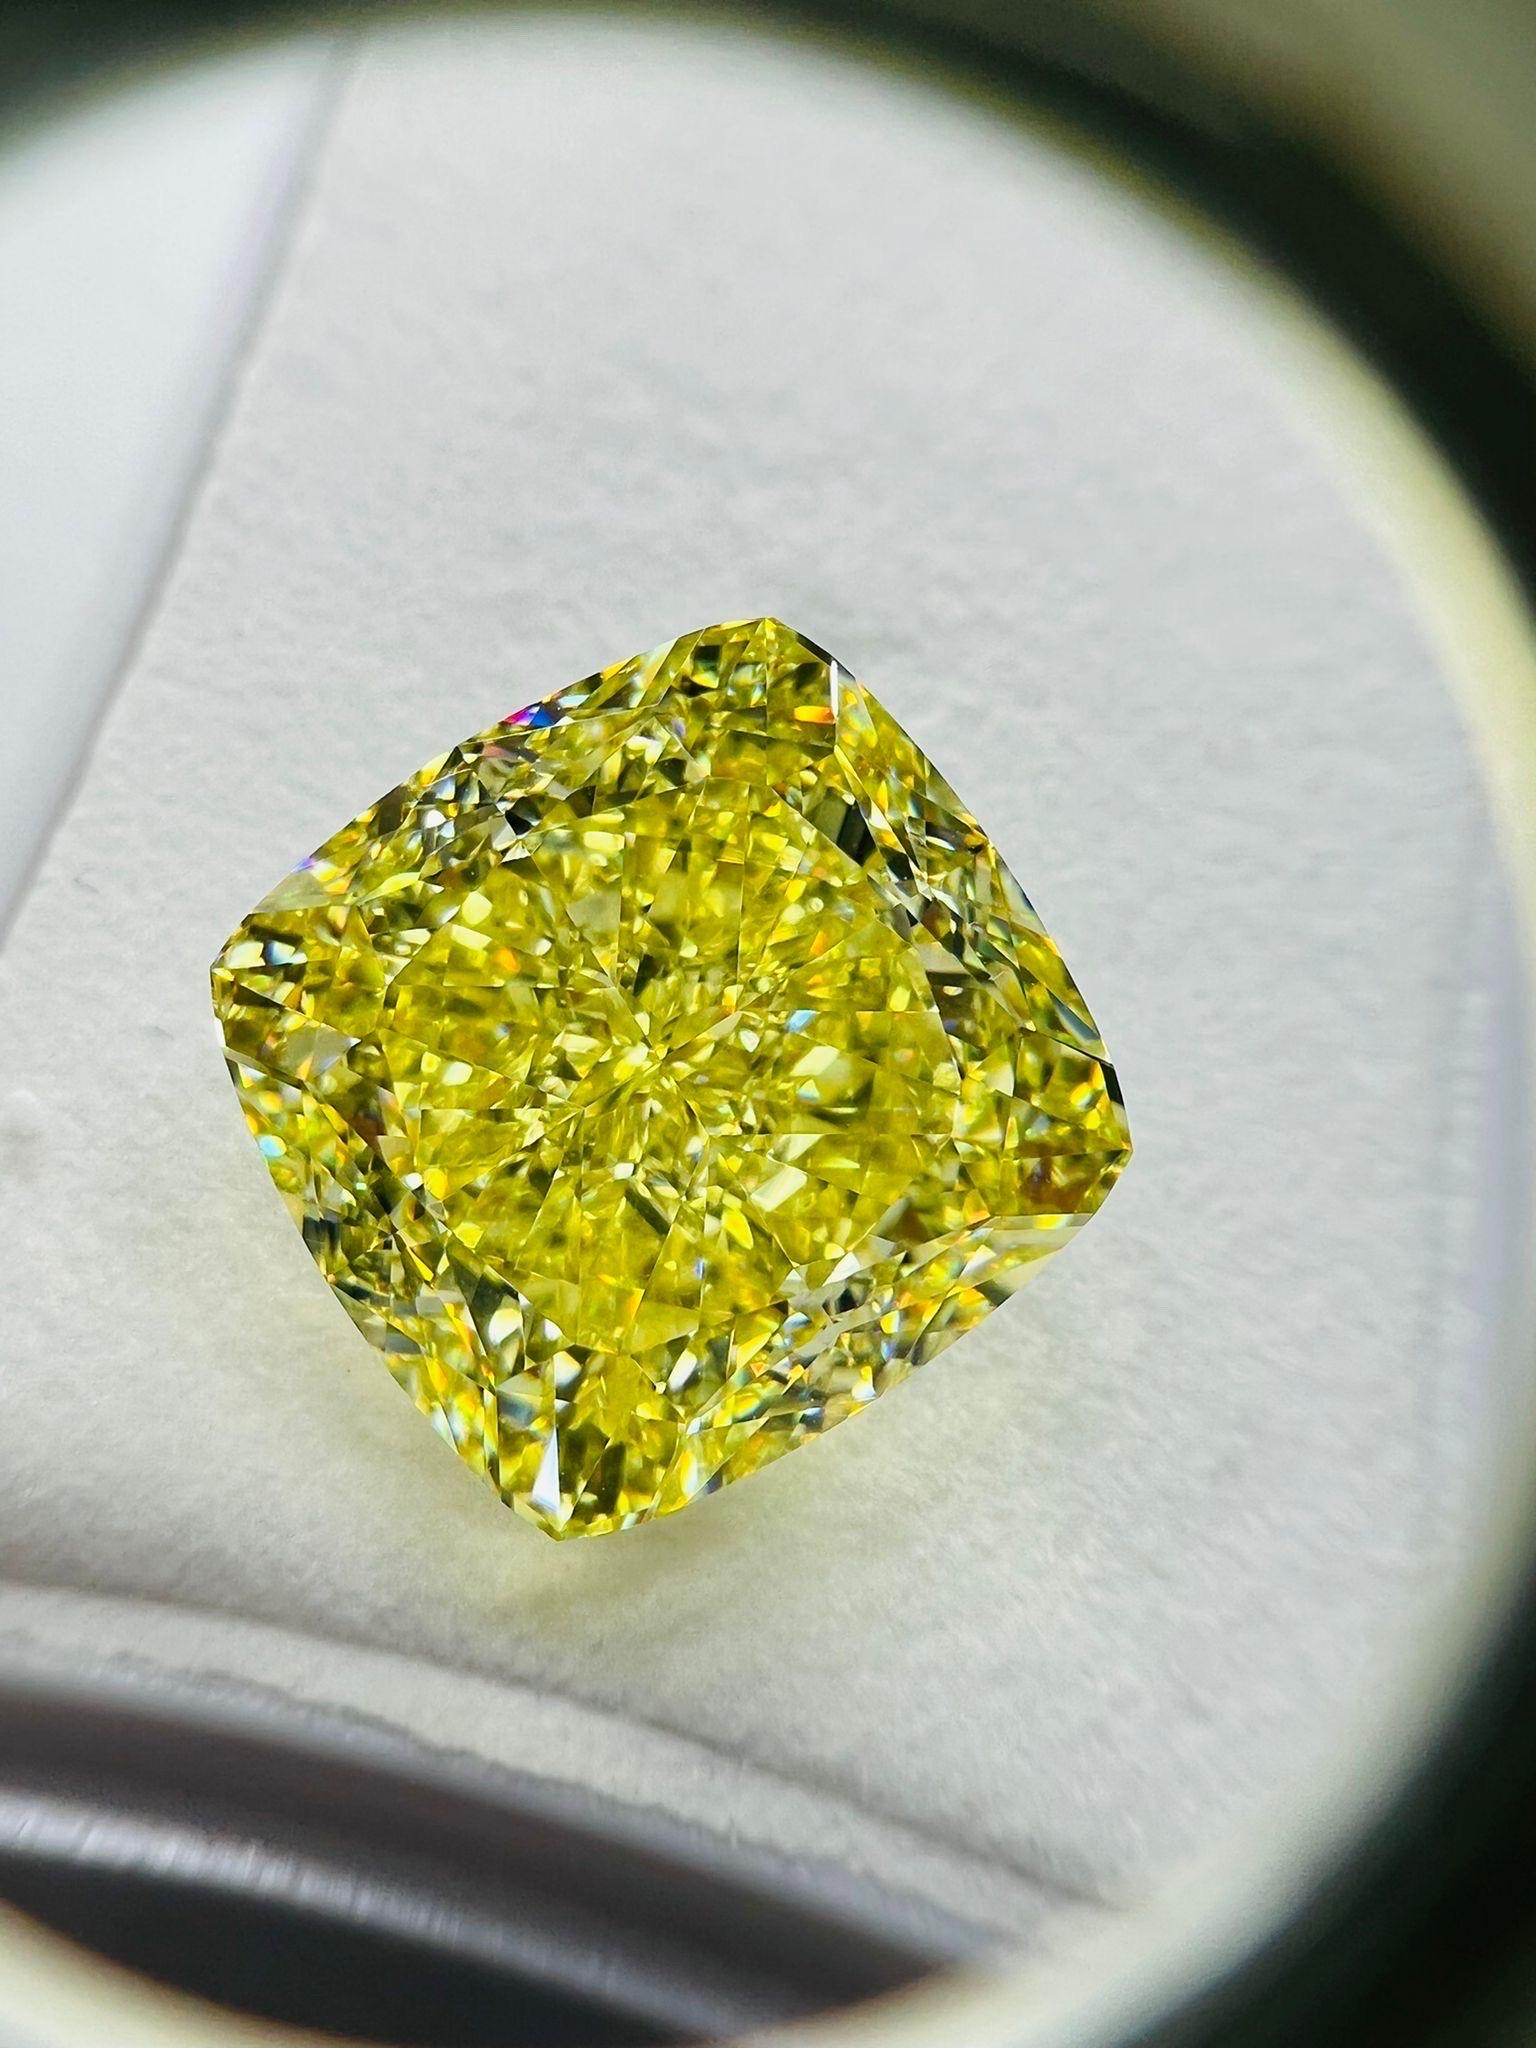 From Emilio Jewelry, a well known and respected wholesaler/dealer located on New York’s iconic Fifth Avenue,
A perfect gorgeous Gia Certified Fancy Intense Yellow Diamonds weighing just over 20 carats! The color is exceptional, 
Clarity: Vs2 
Please